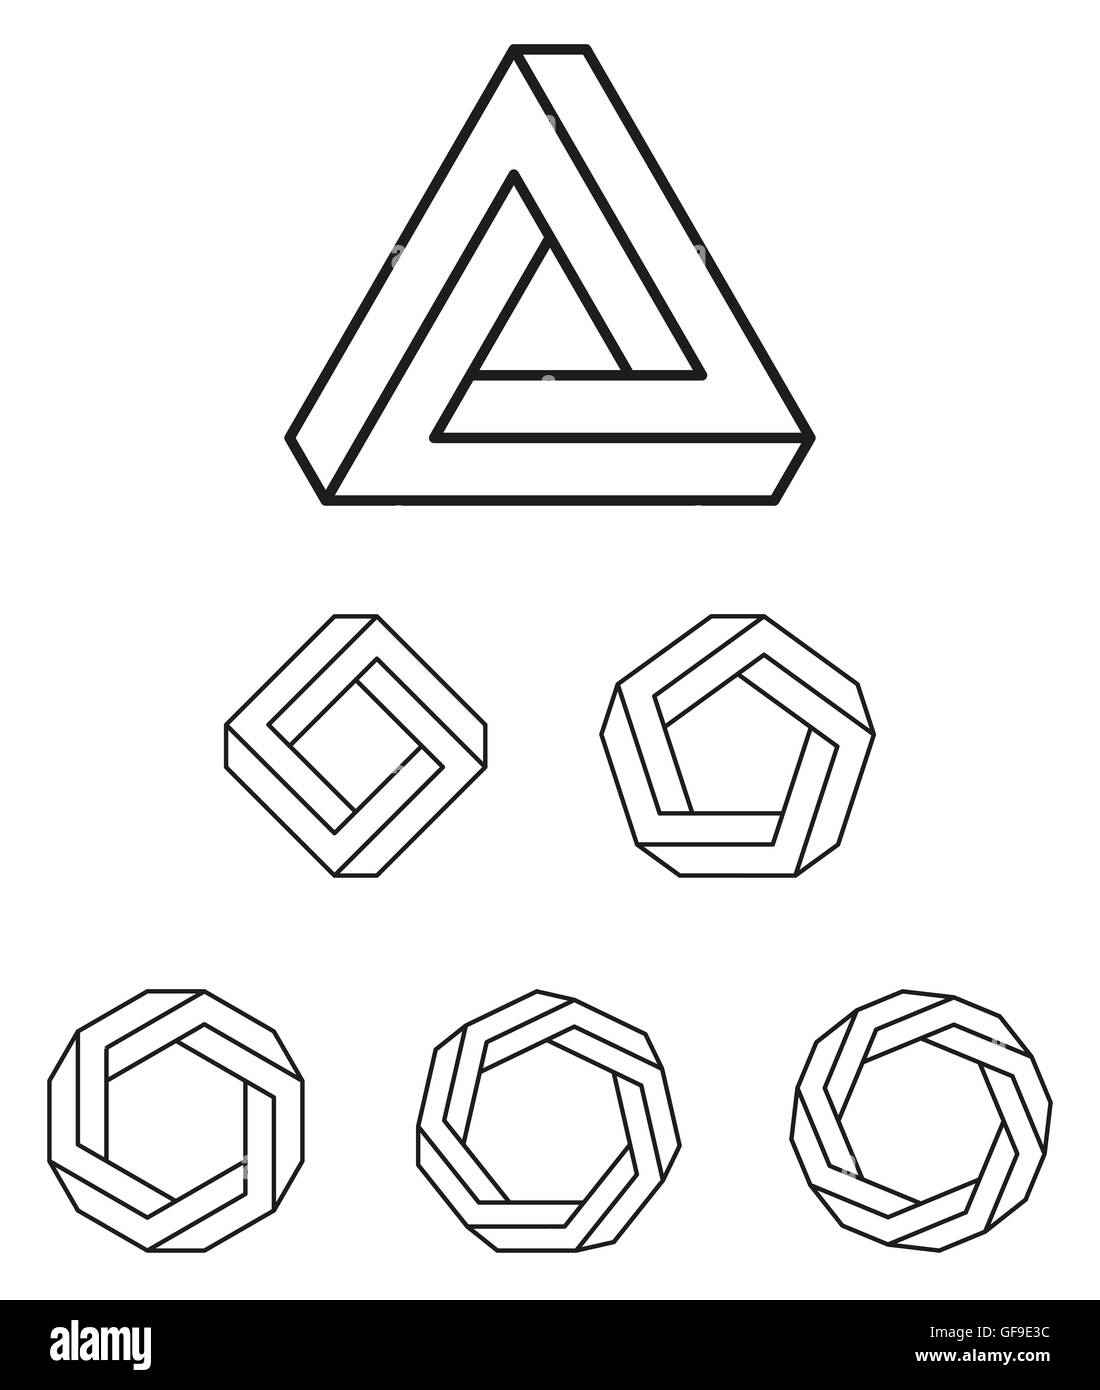 Penrose triangle and polygons outline. The Penrose tribar, an impossible object, appears to be a solid object. Stock Photo